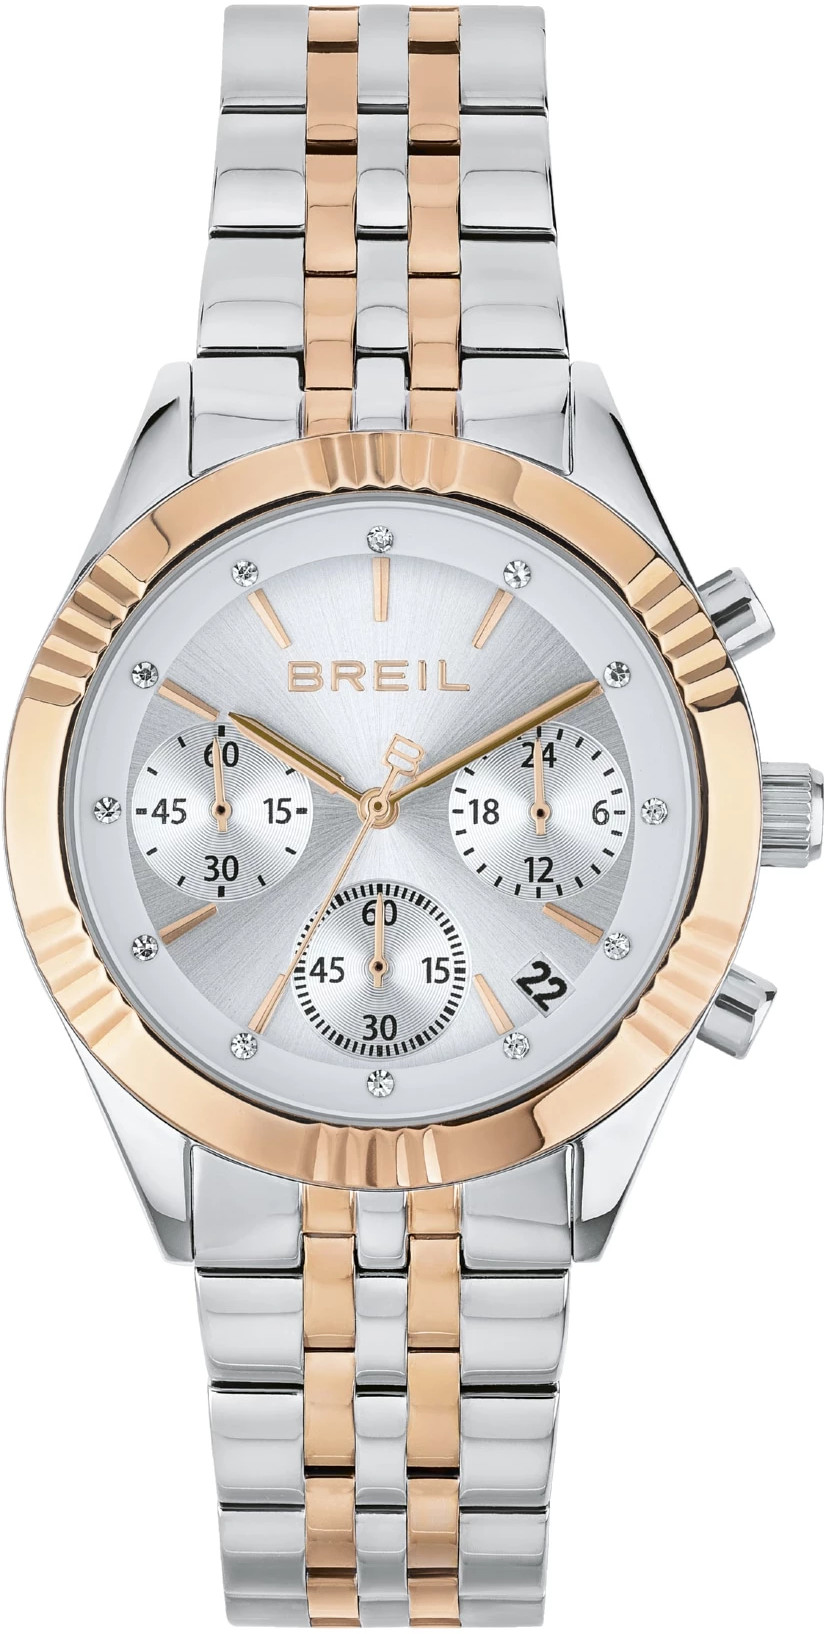 BREIL Stand Out TW2018